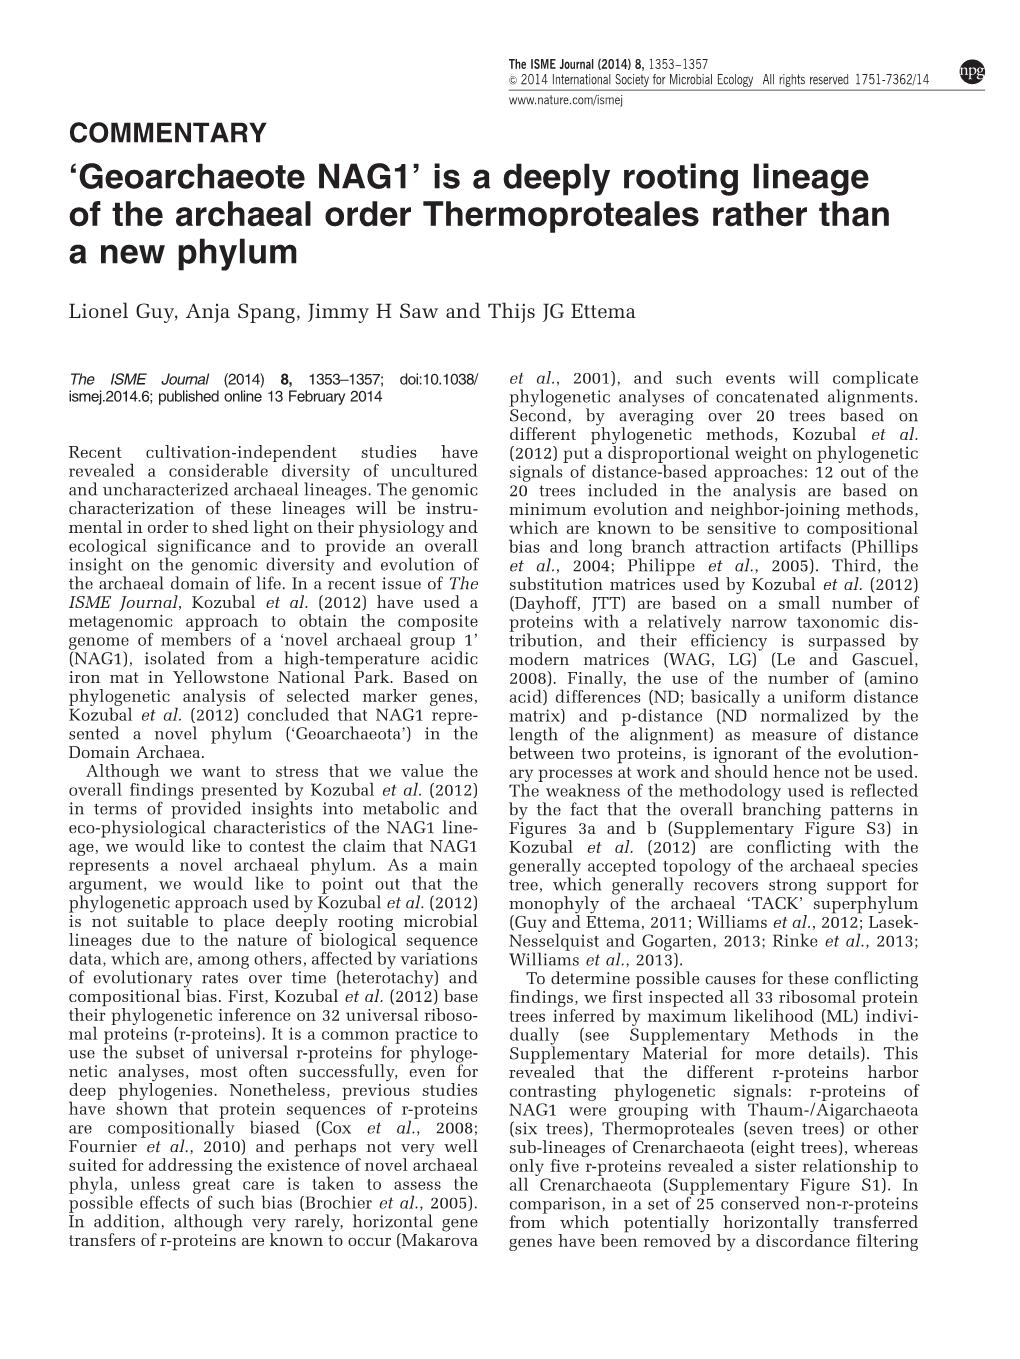 Is a Deeply Rooting Lineage of the Archaeal Order Thermoproteales Rather Than a New Phylum